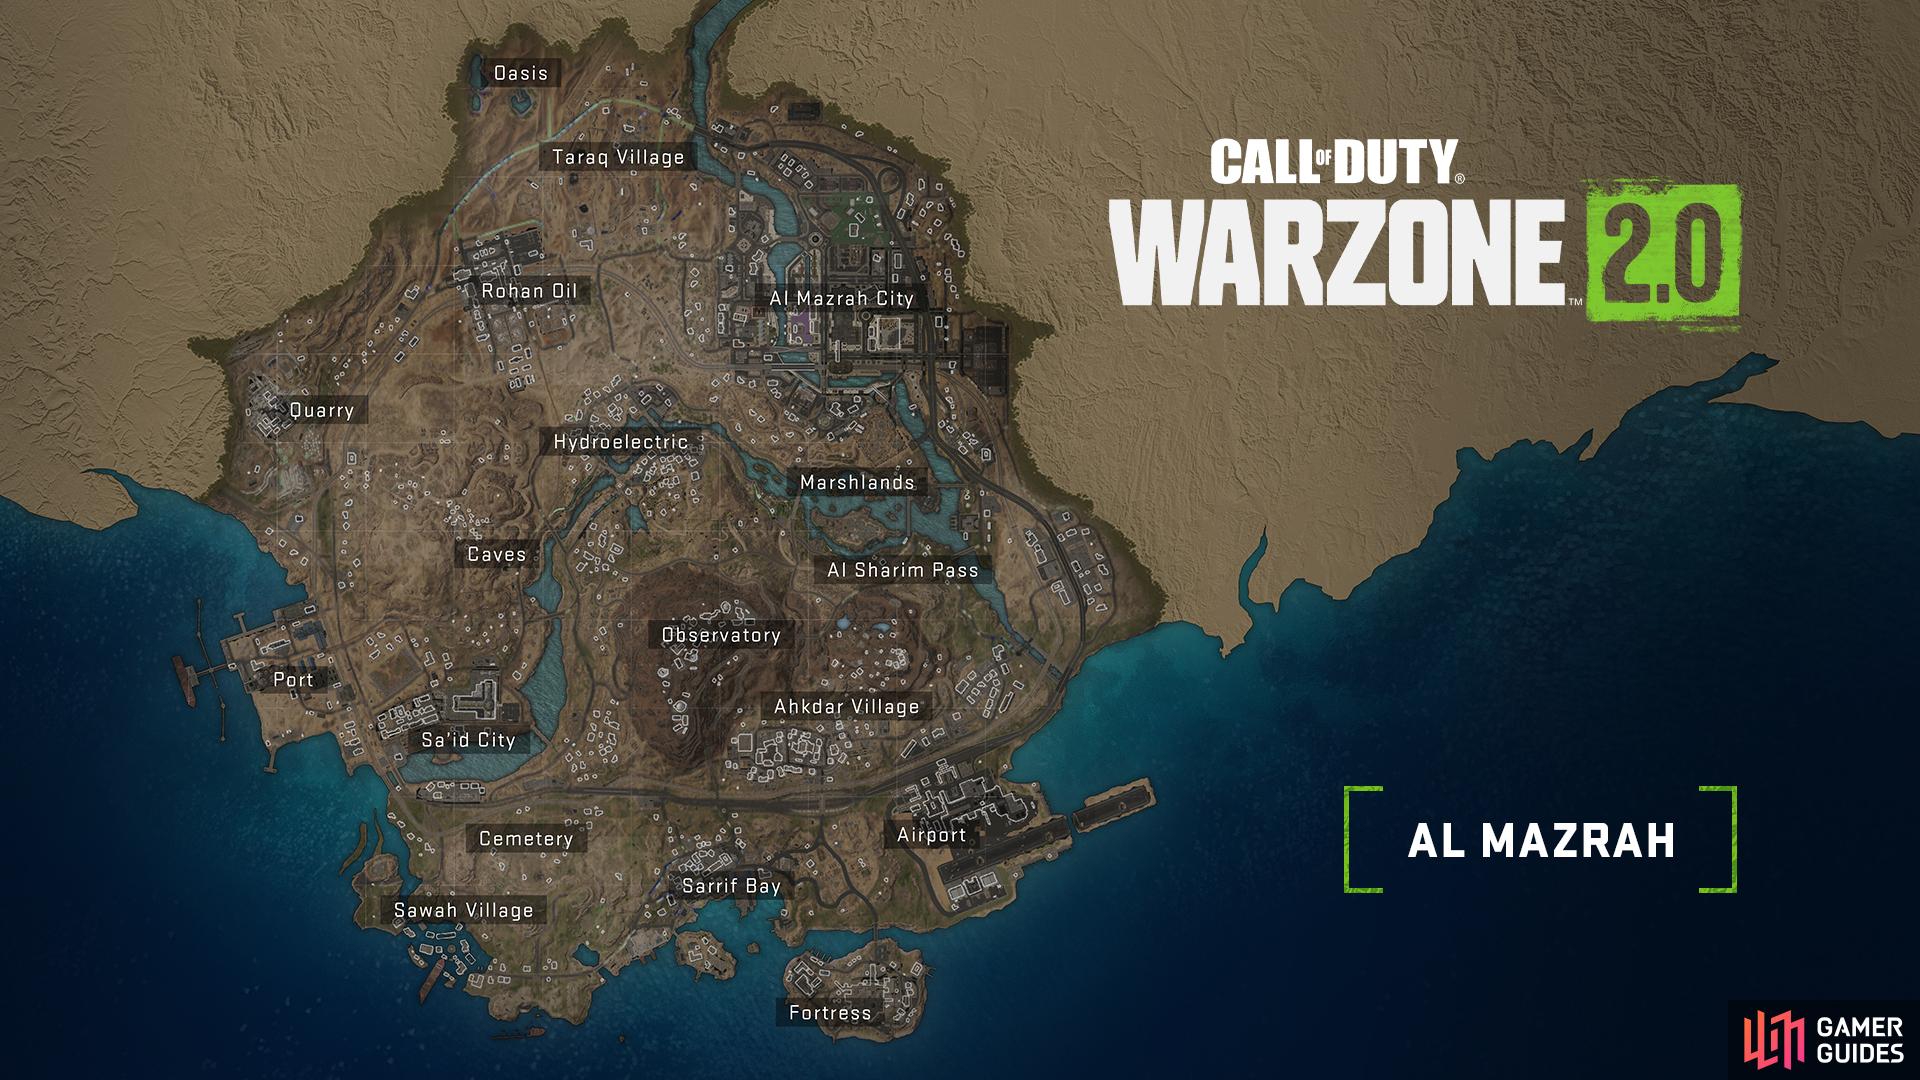 The new Warzone 2.0 will be unlocked in its entirety for DMZ opening up huge gameplay opportunities (Image courtesy of callofduty.com)